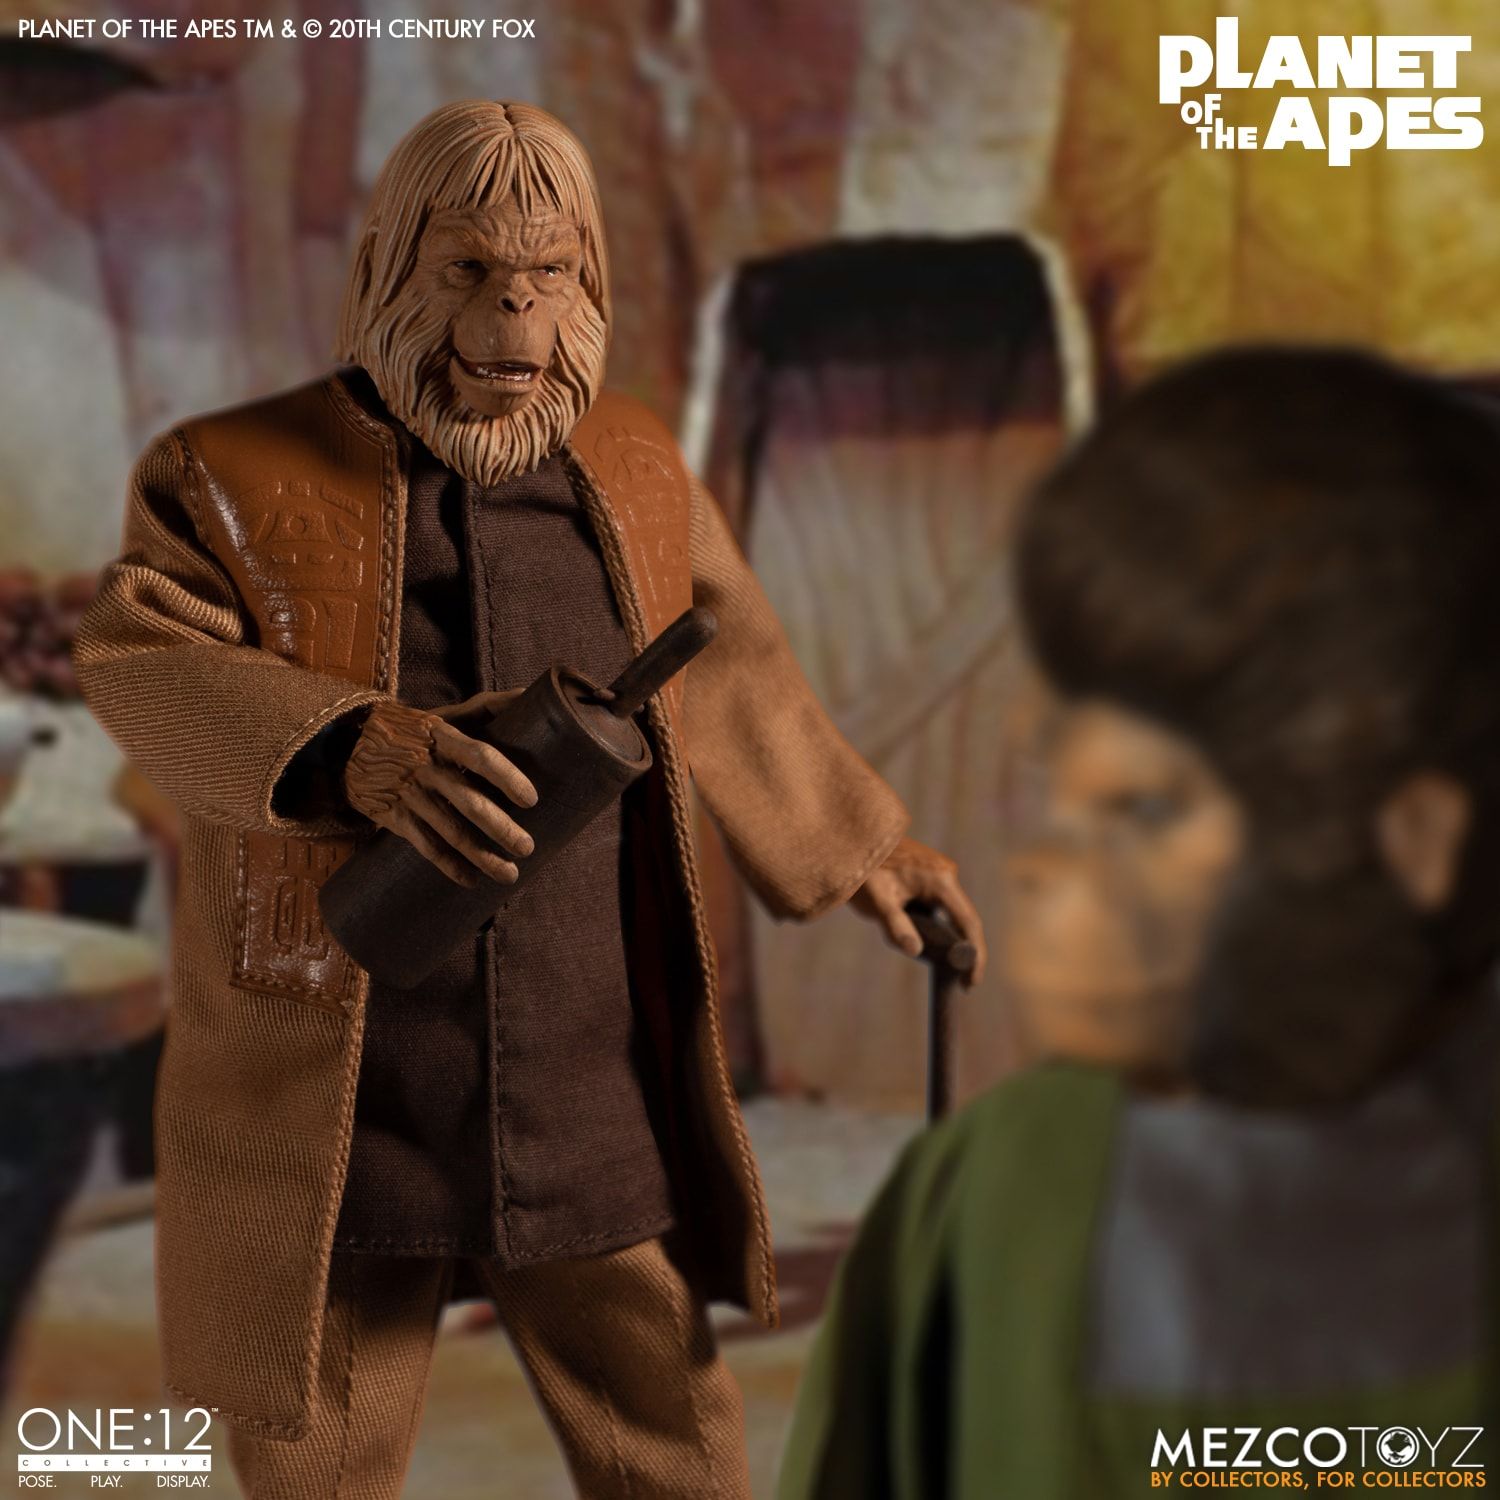 New Product: Mezco Planet of the Apes Dr. Zaius 8344